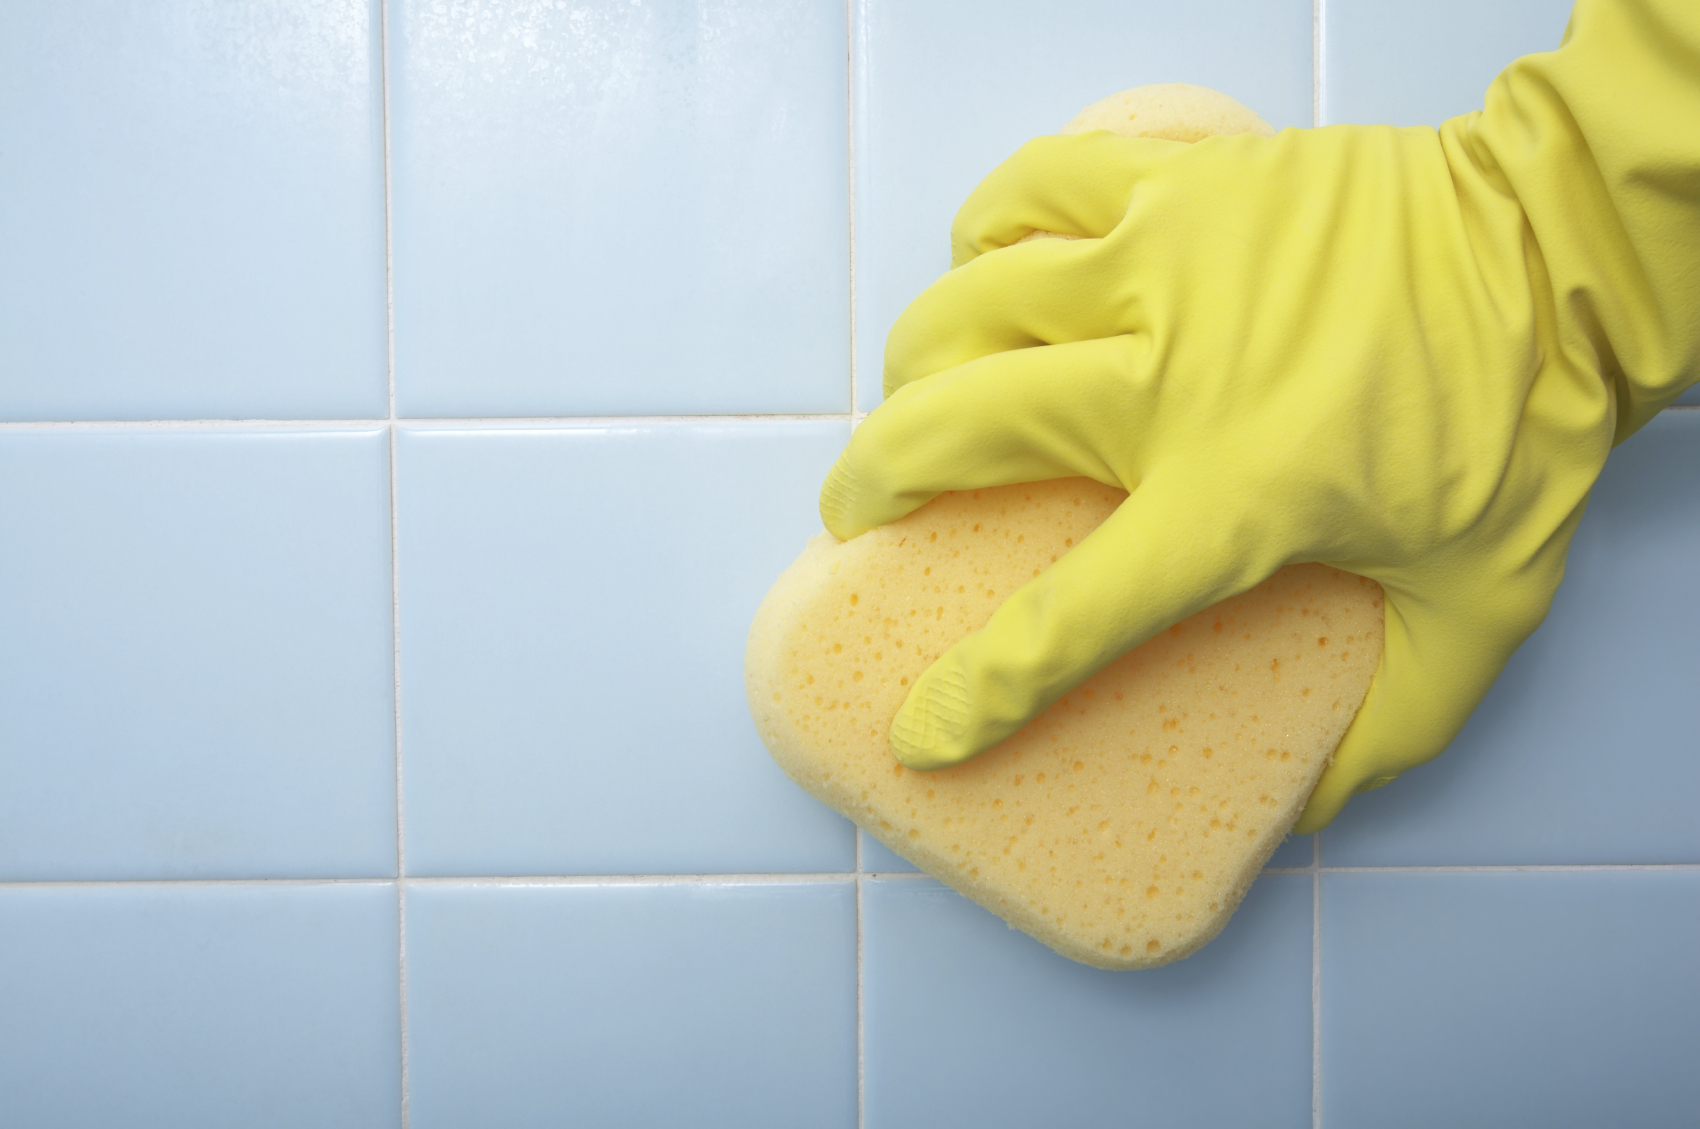 Rubber-gloved hand scrubbing bathroom tile with a sponge